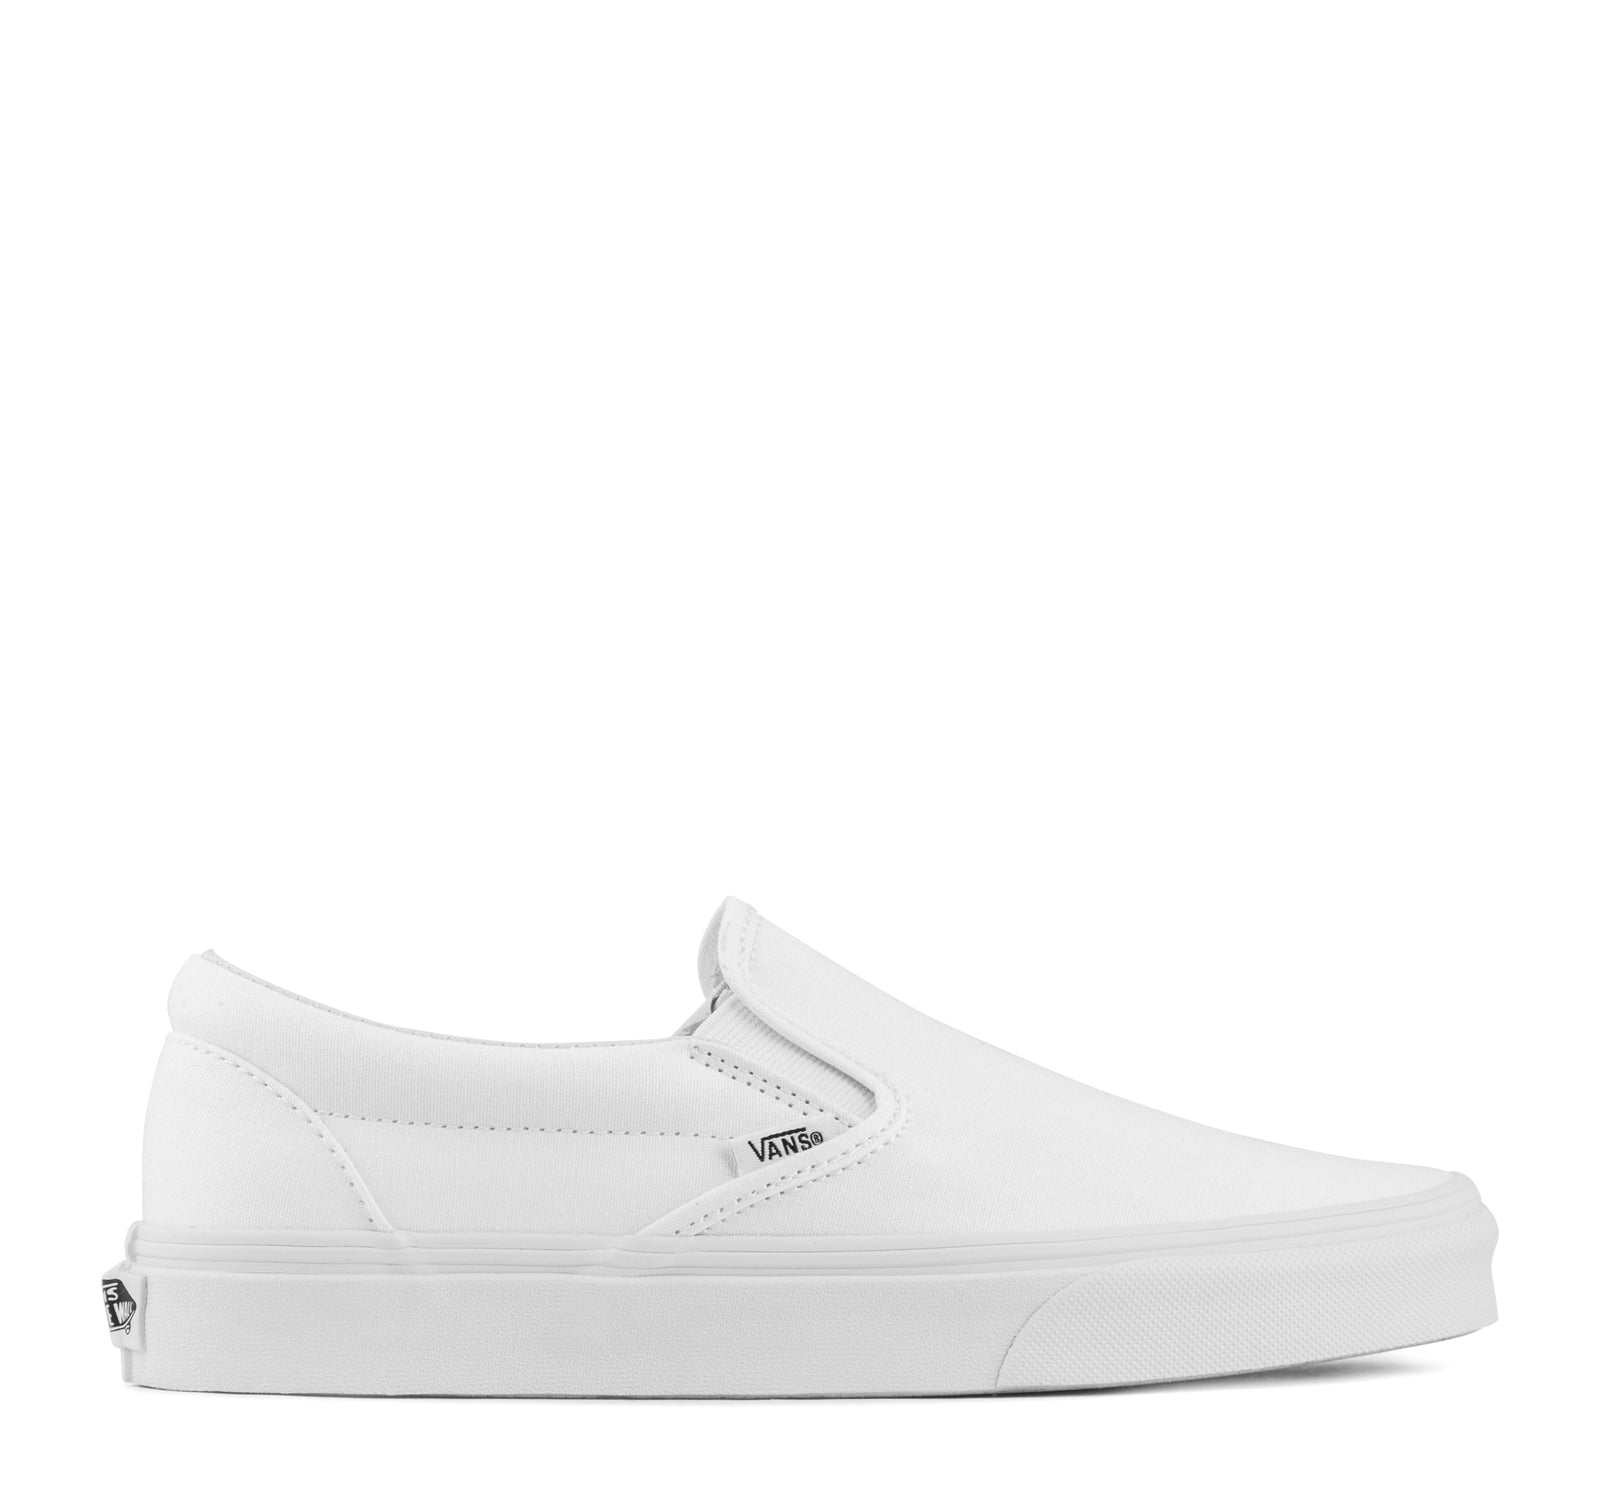 Vans Classic Slip-On Shoes– On The EDGE